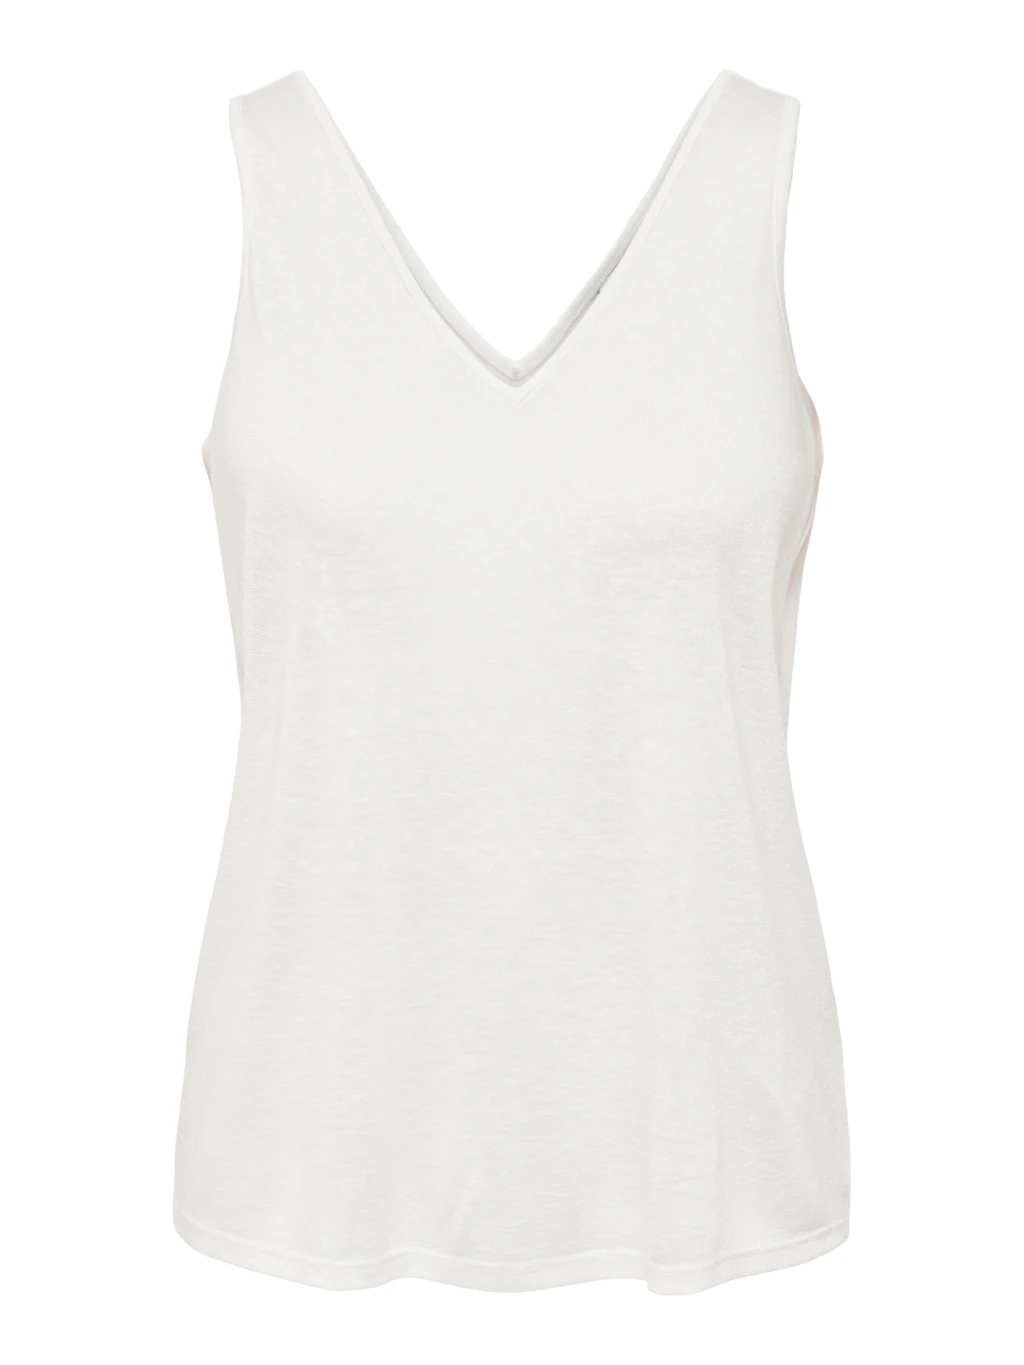 JDY Faustina Singlet JRS, offwhite